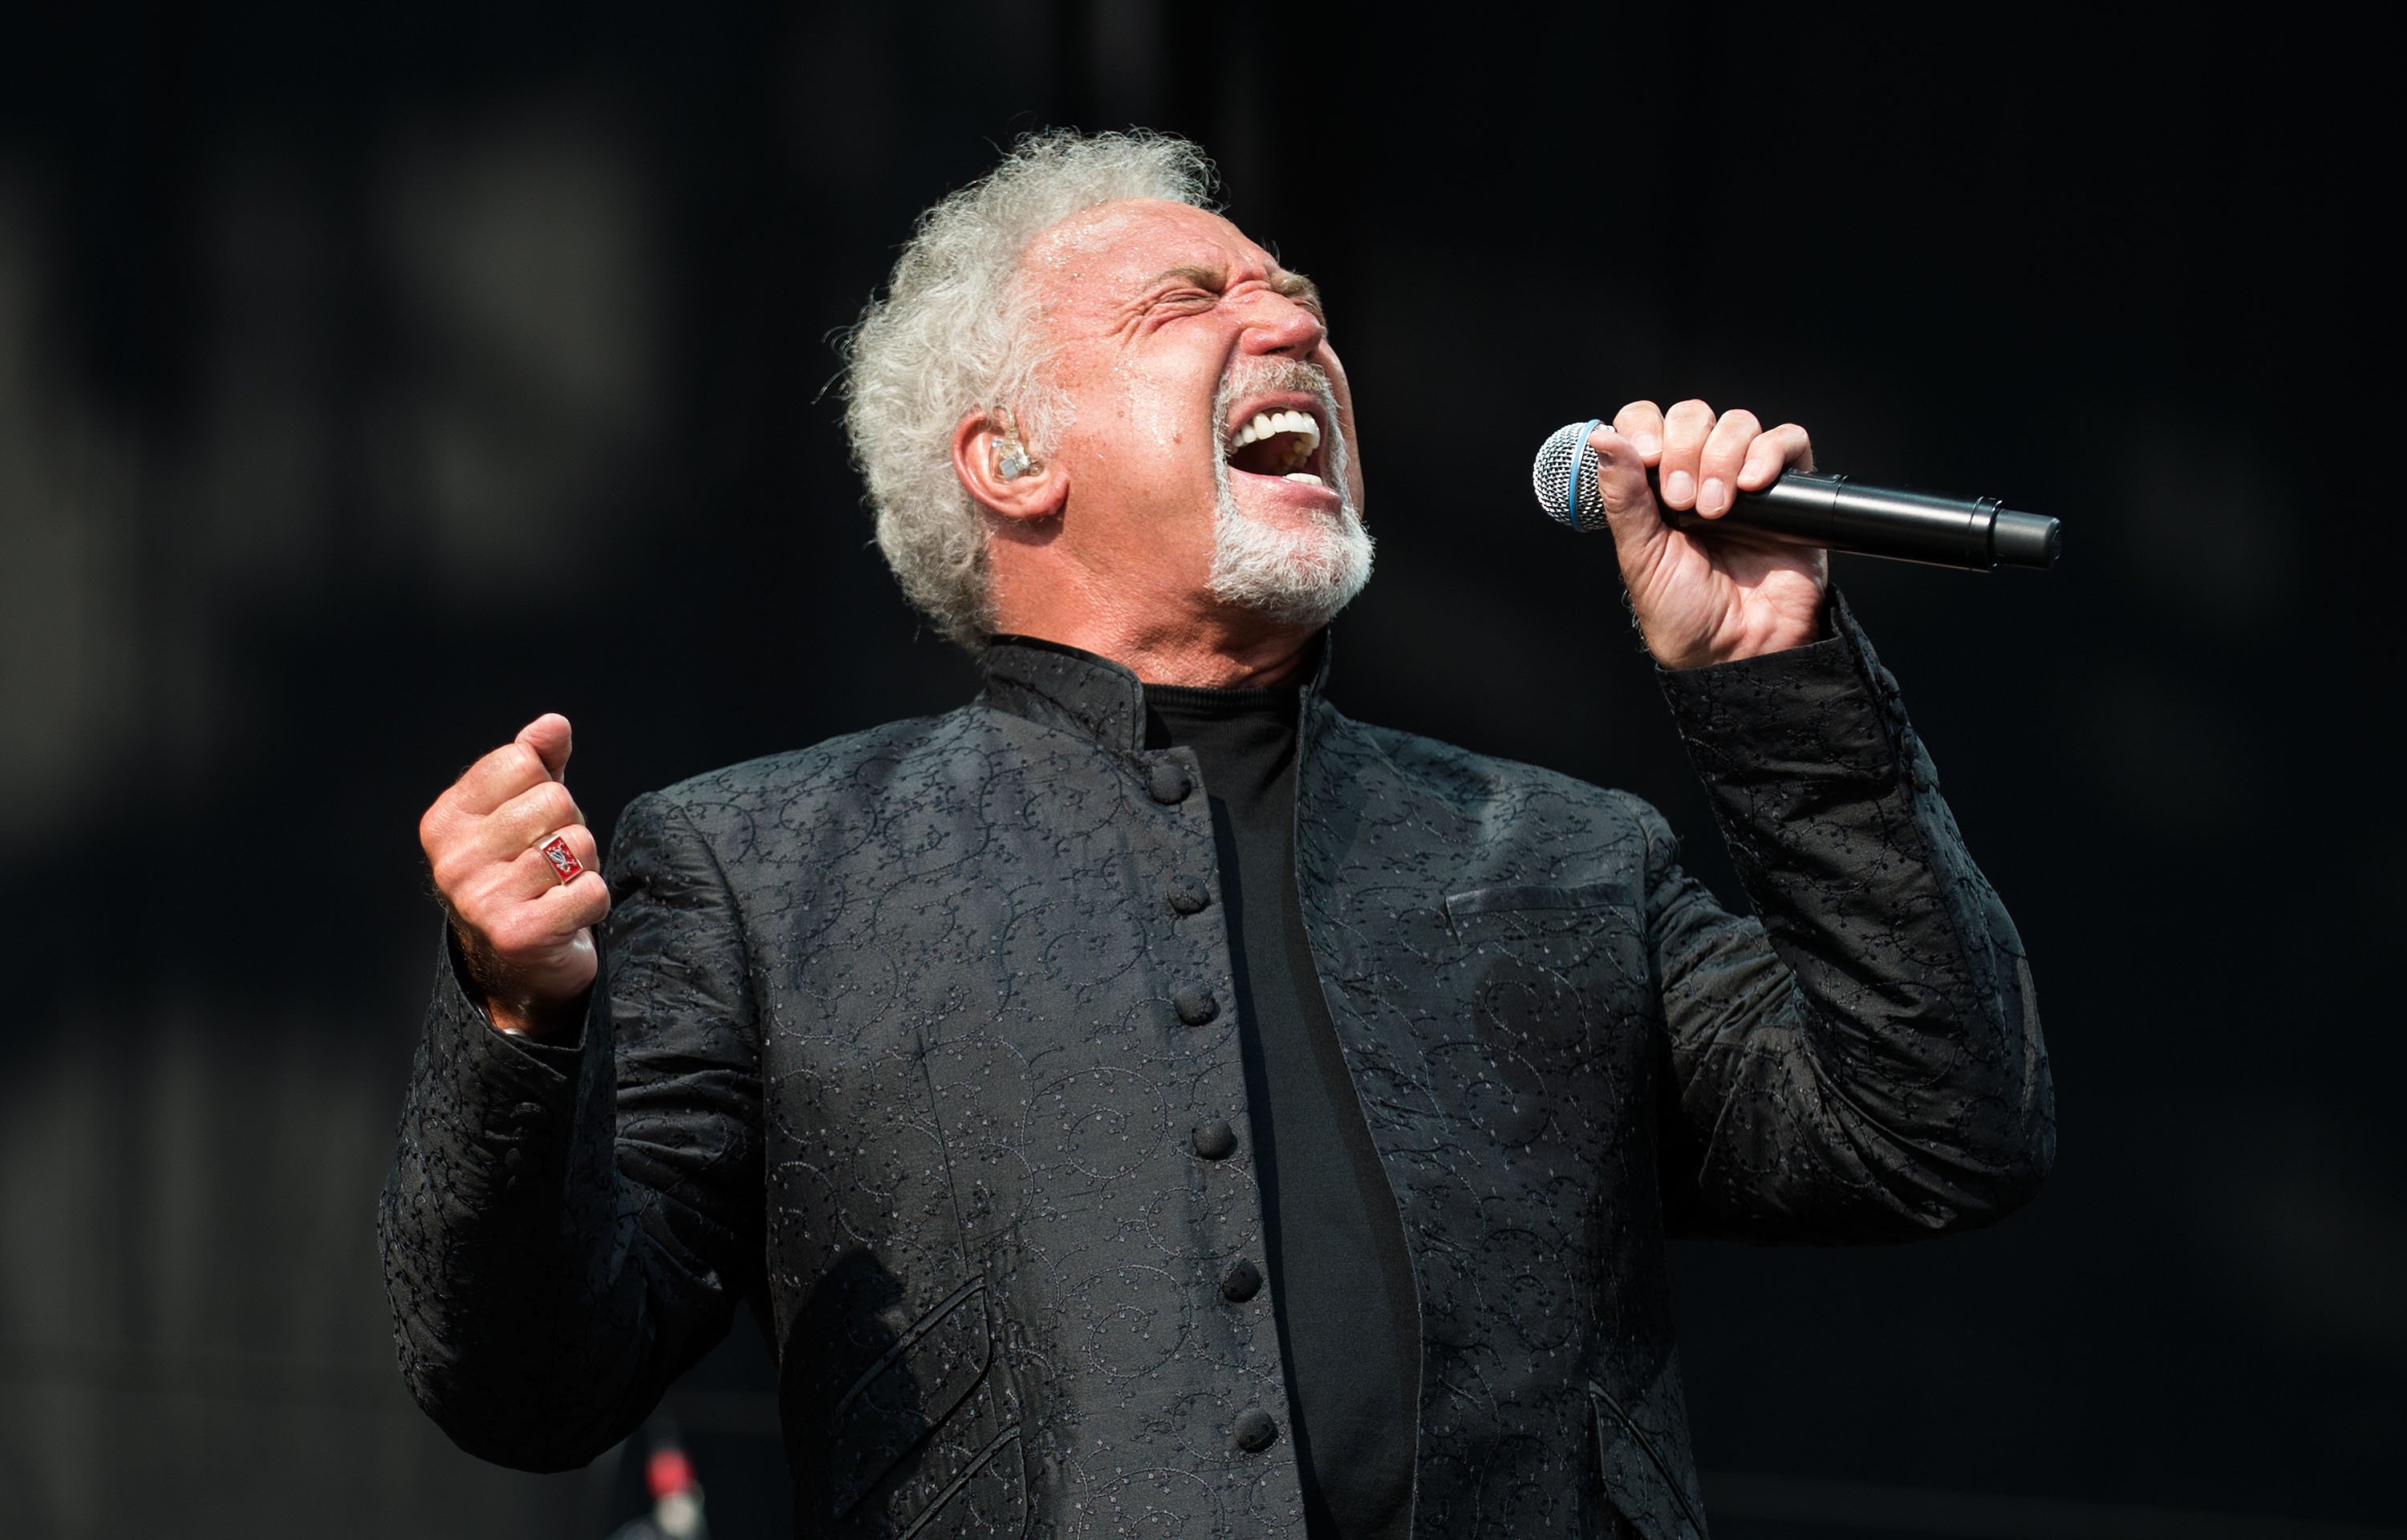 Tom Jones performing at the V Festival on August 19, 2012, in England | Source: Getty Images